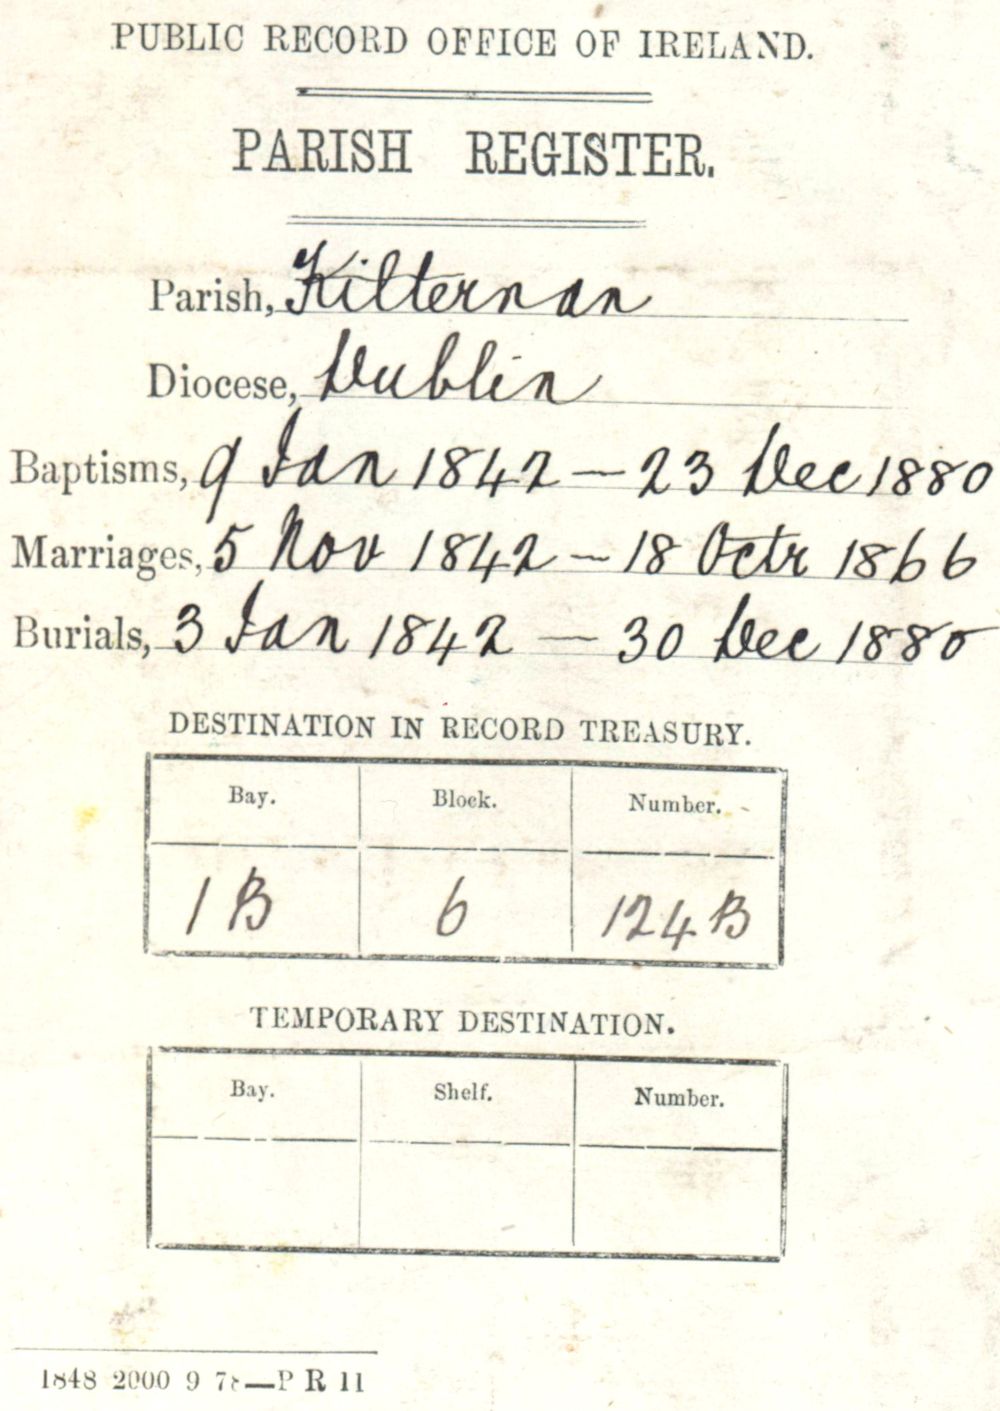 Public Record Office labels as affixed to each of the combined registers for Kilternan on receipt following their transfer in the context of the Public Records Office Ireland Act of 1867.